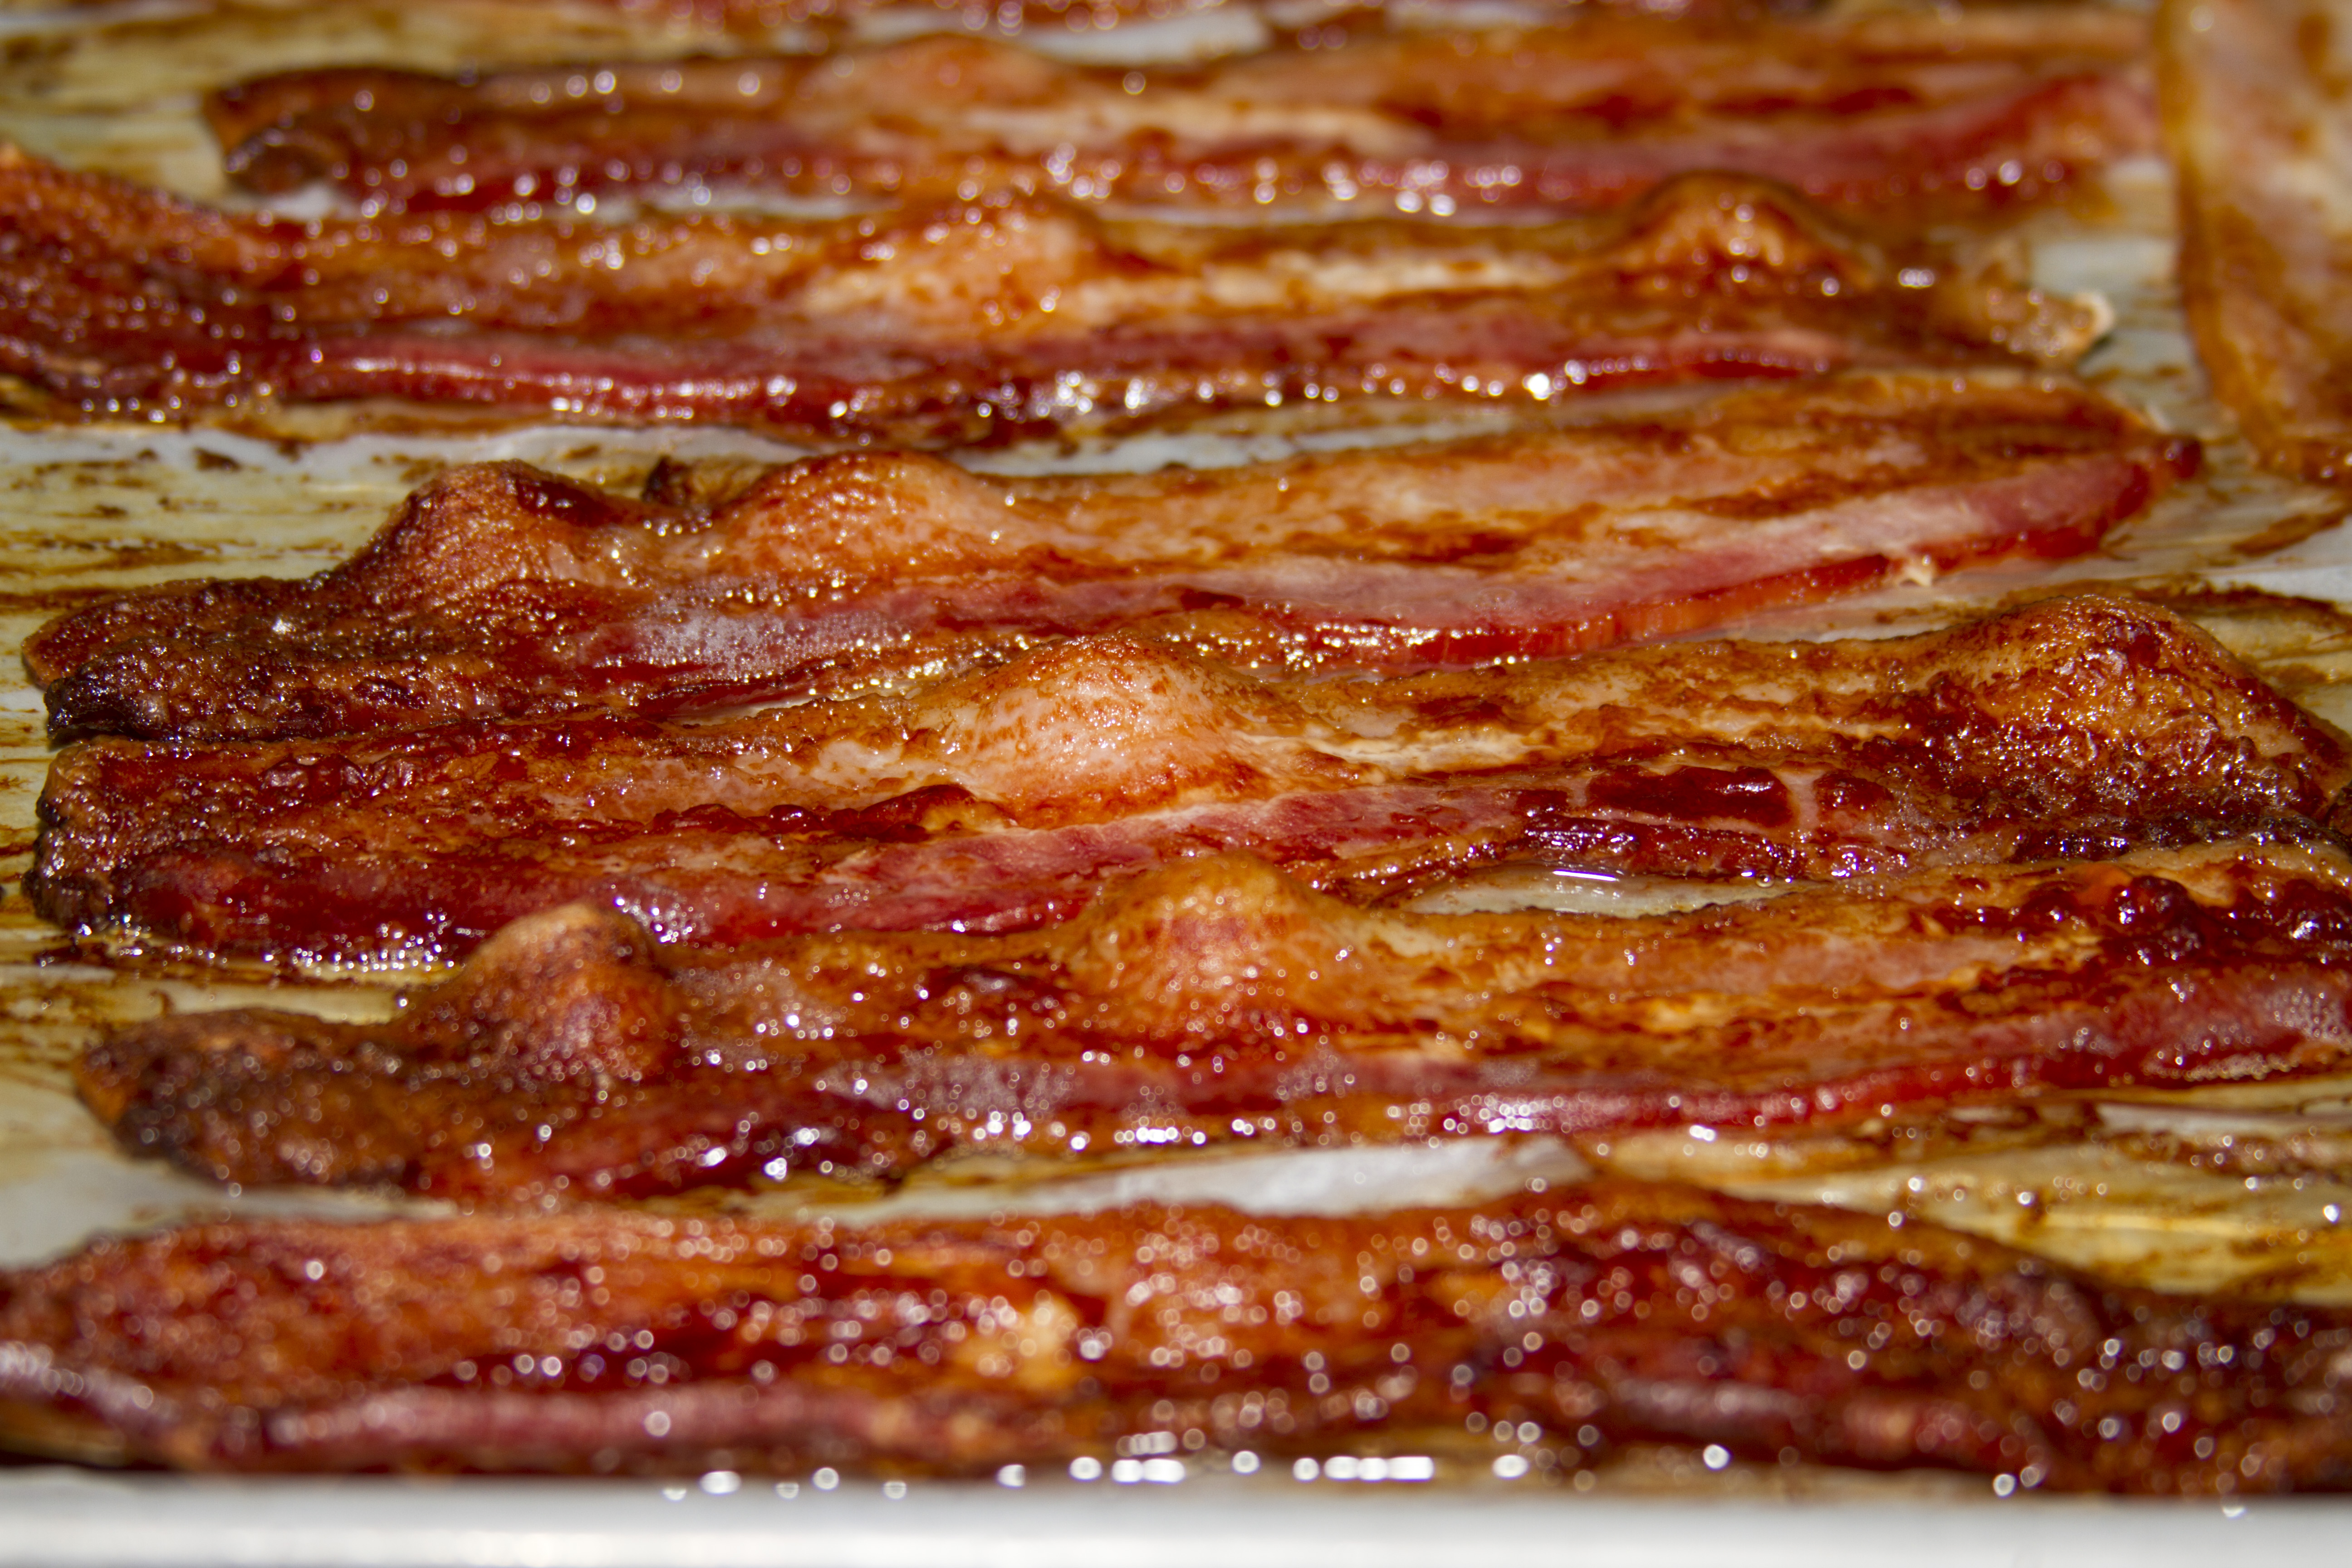 Bacon Wallpapers High Quality Download Free HD Wallpapers Download Free Images Wallpaper [wallpaper981.blogspot.com]